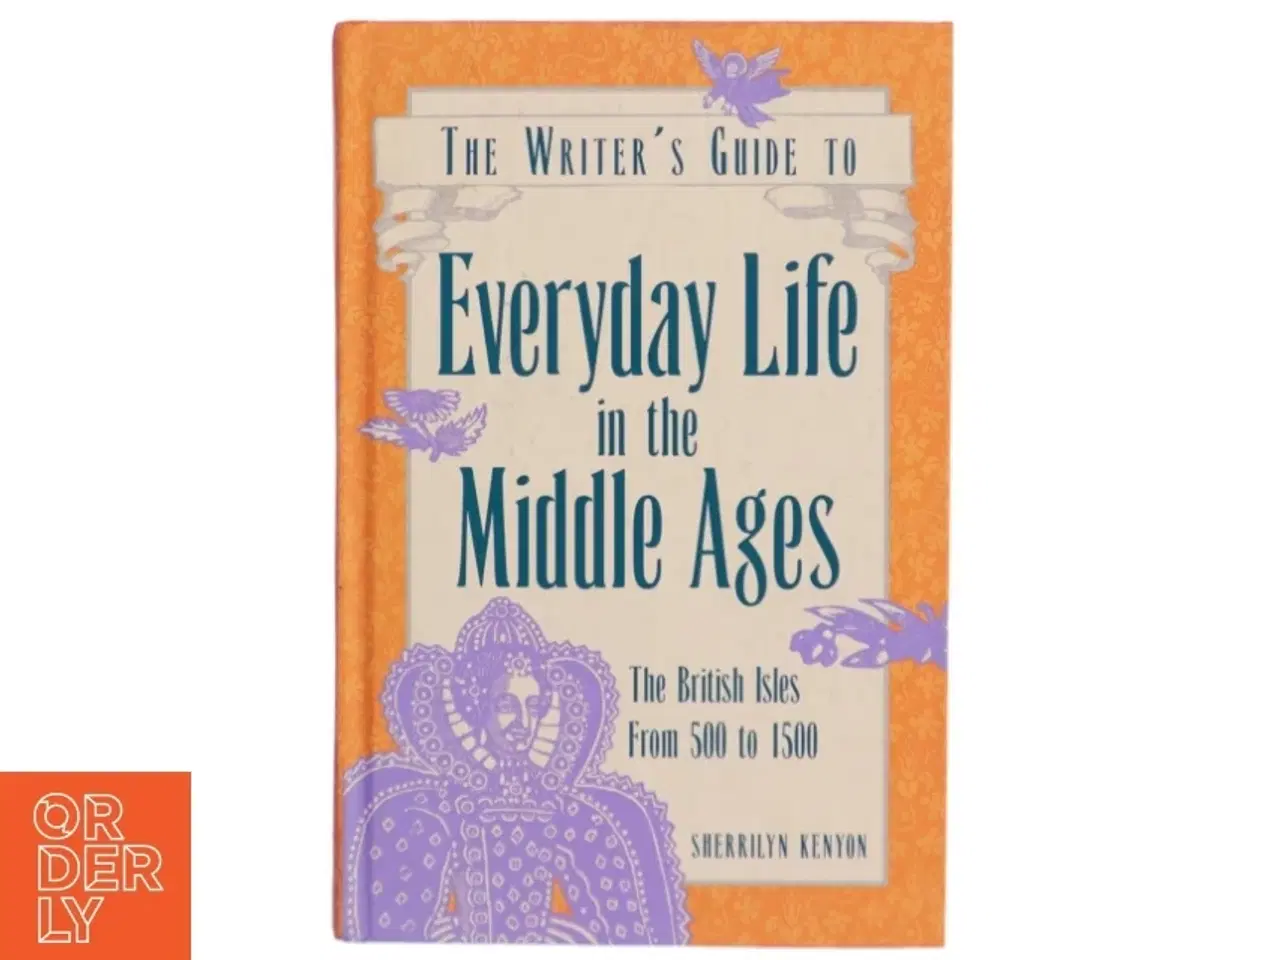 Billede 1 - The Writer's Guide to Everyday Life in the Middle Ages af Sherrilyn Kenyon (Bog)